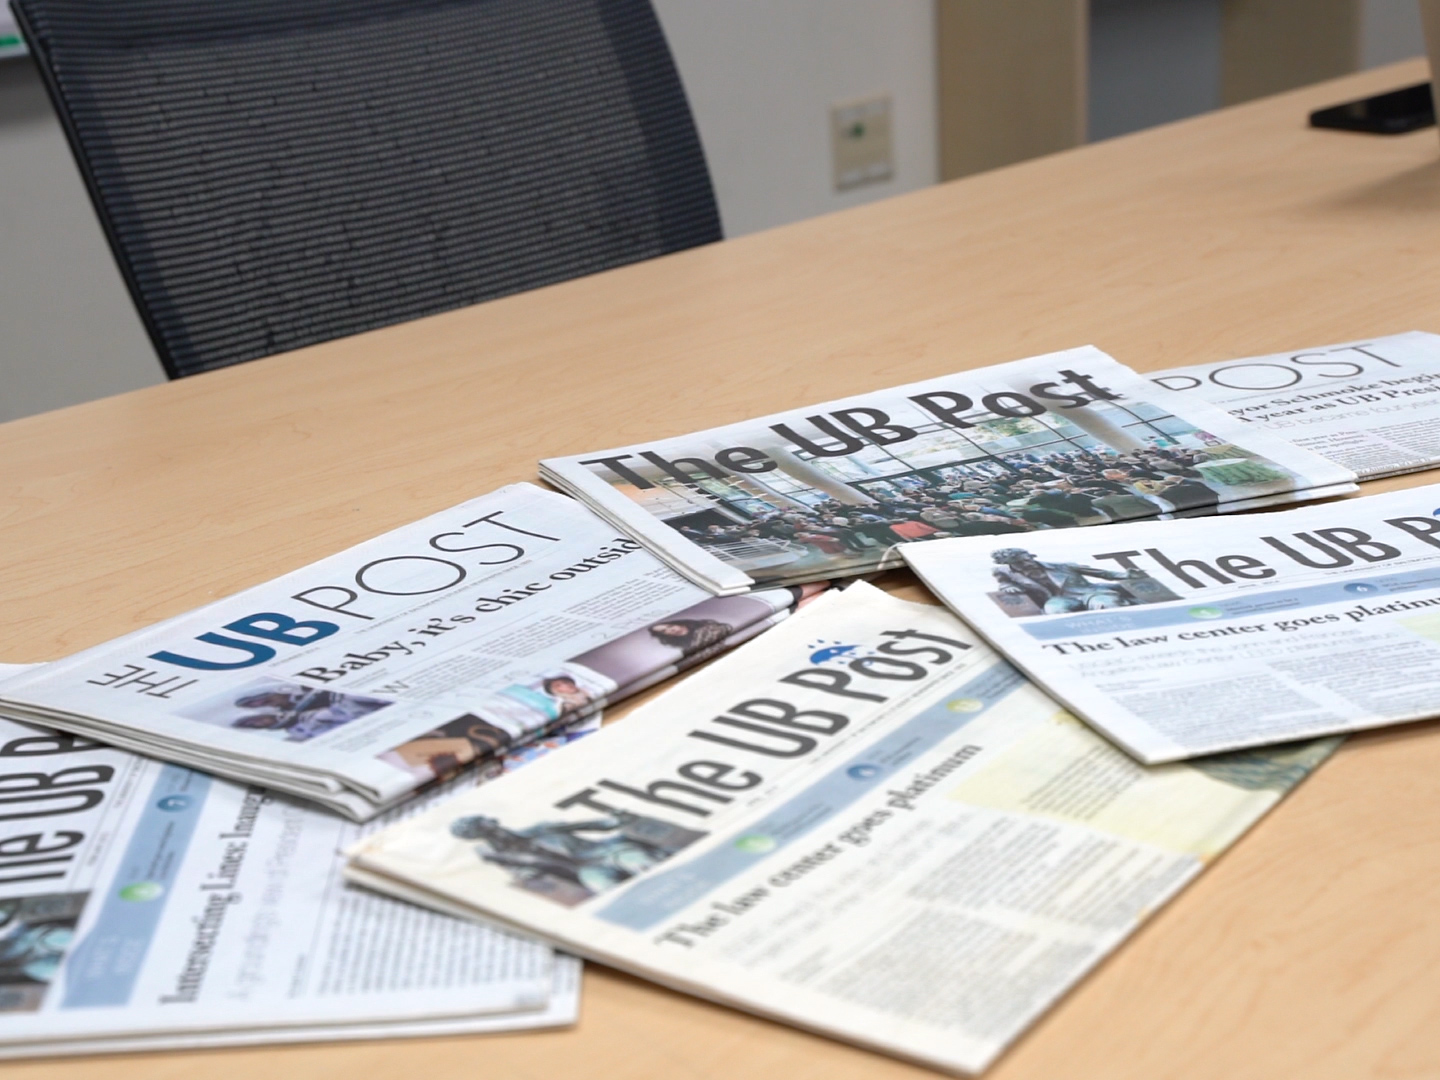 This is a still from the video I created with my classmates on the UB Post. The photo is of several newspapers on a desk. 